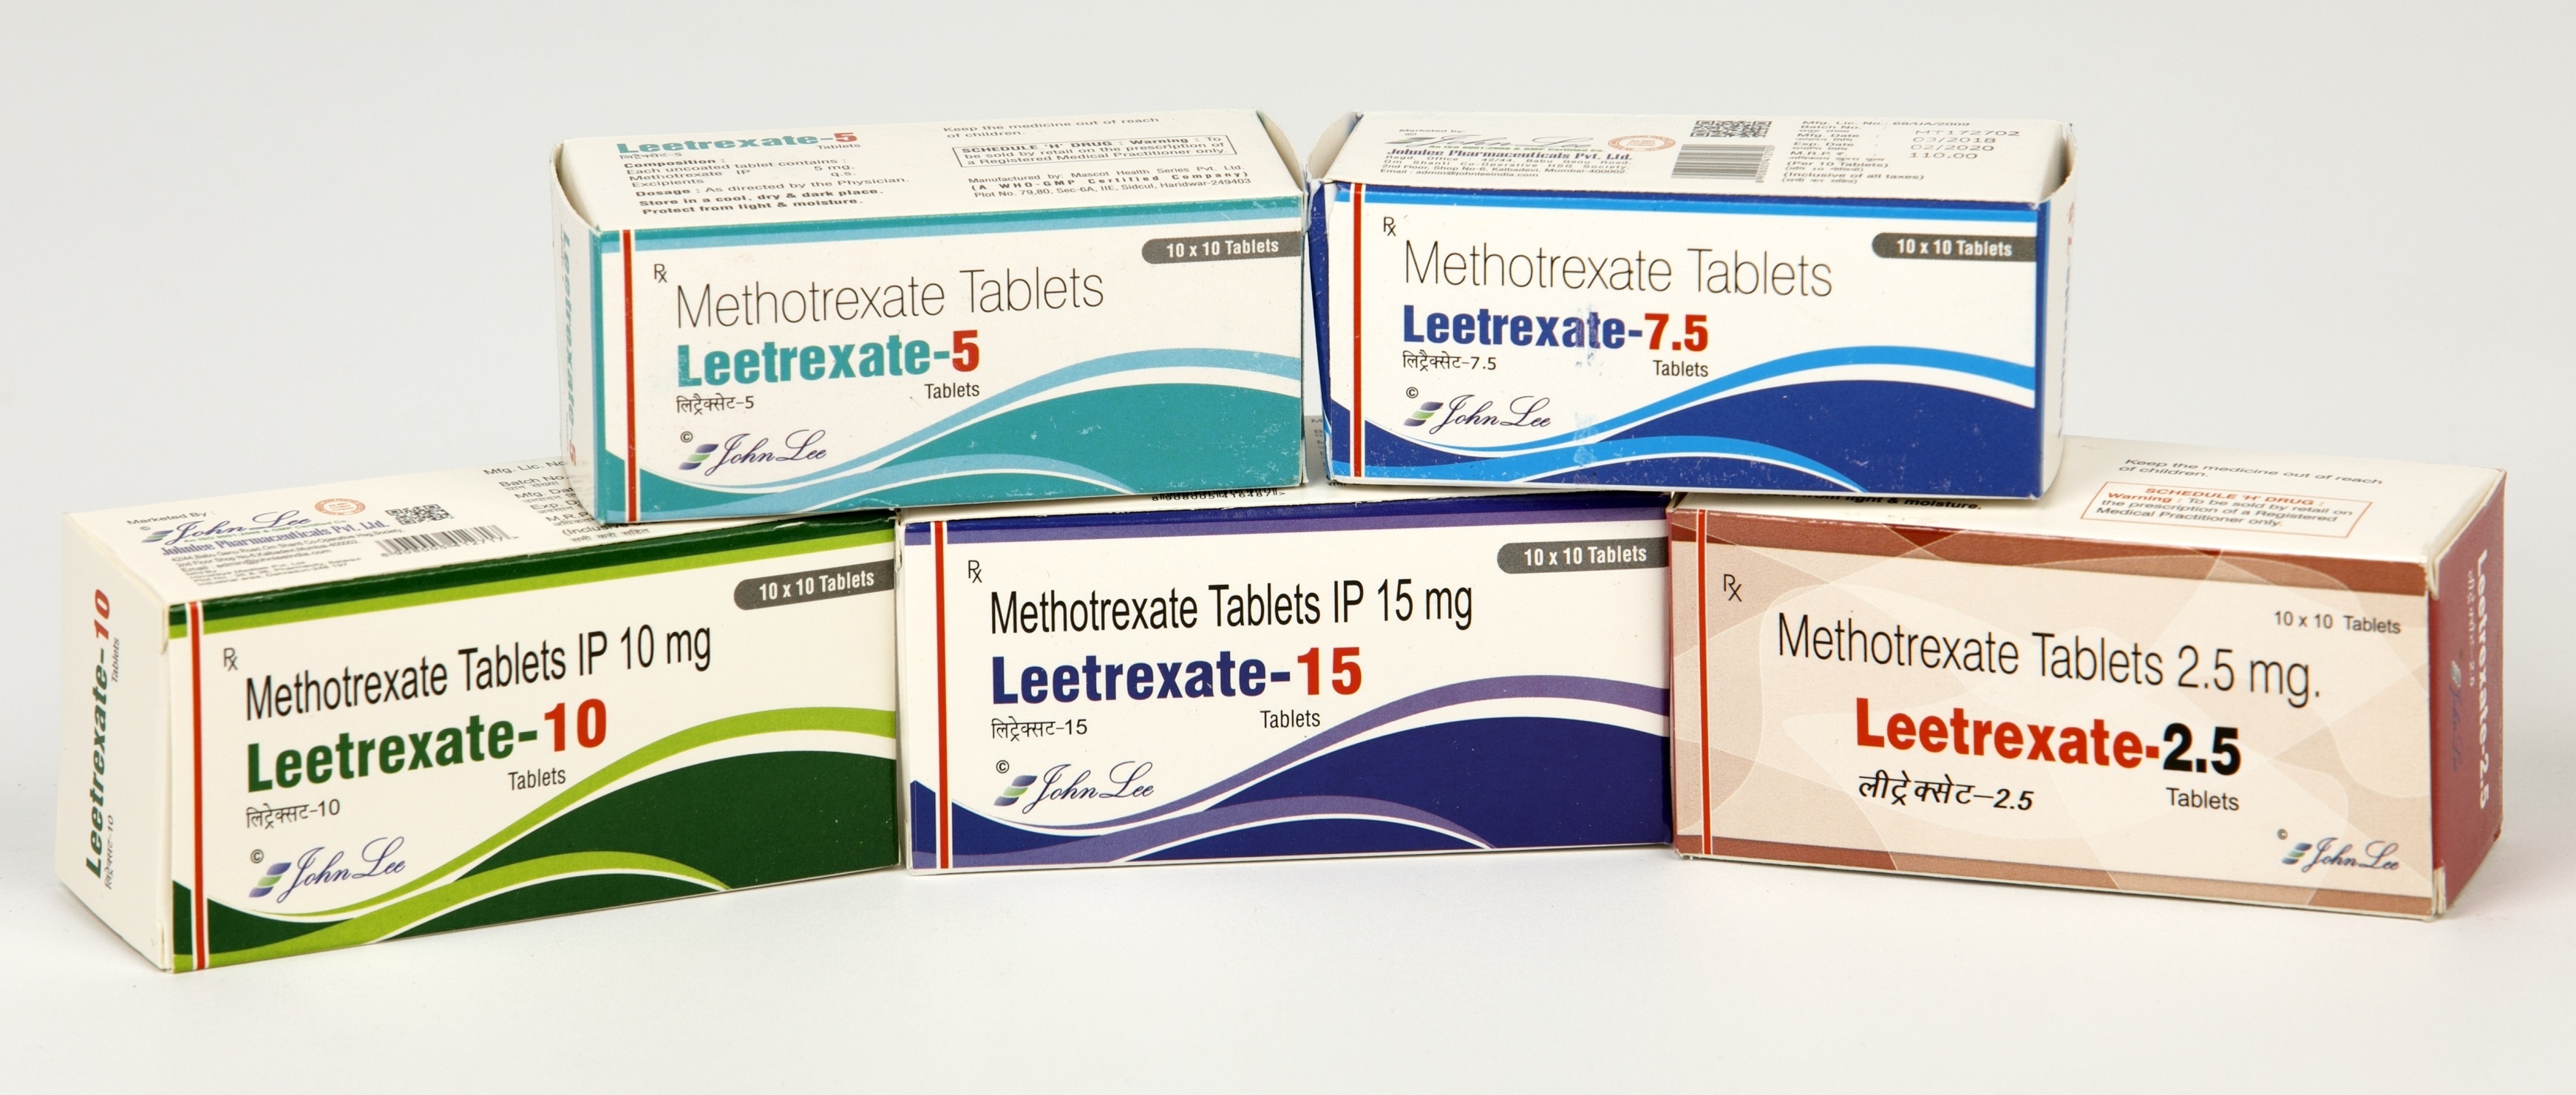 Methotrexate Tablets